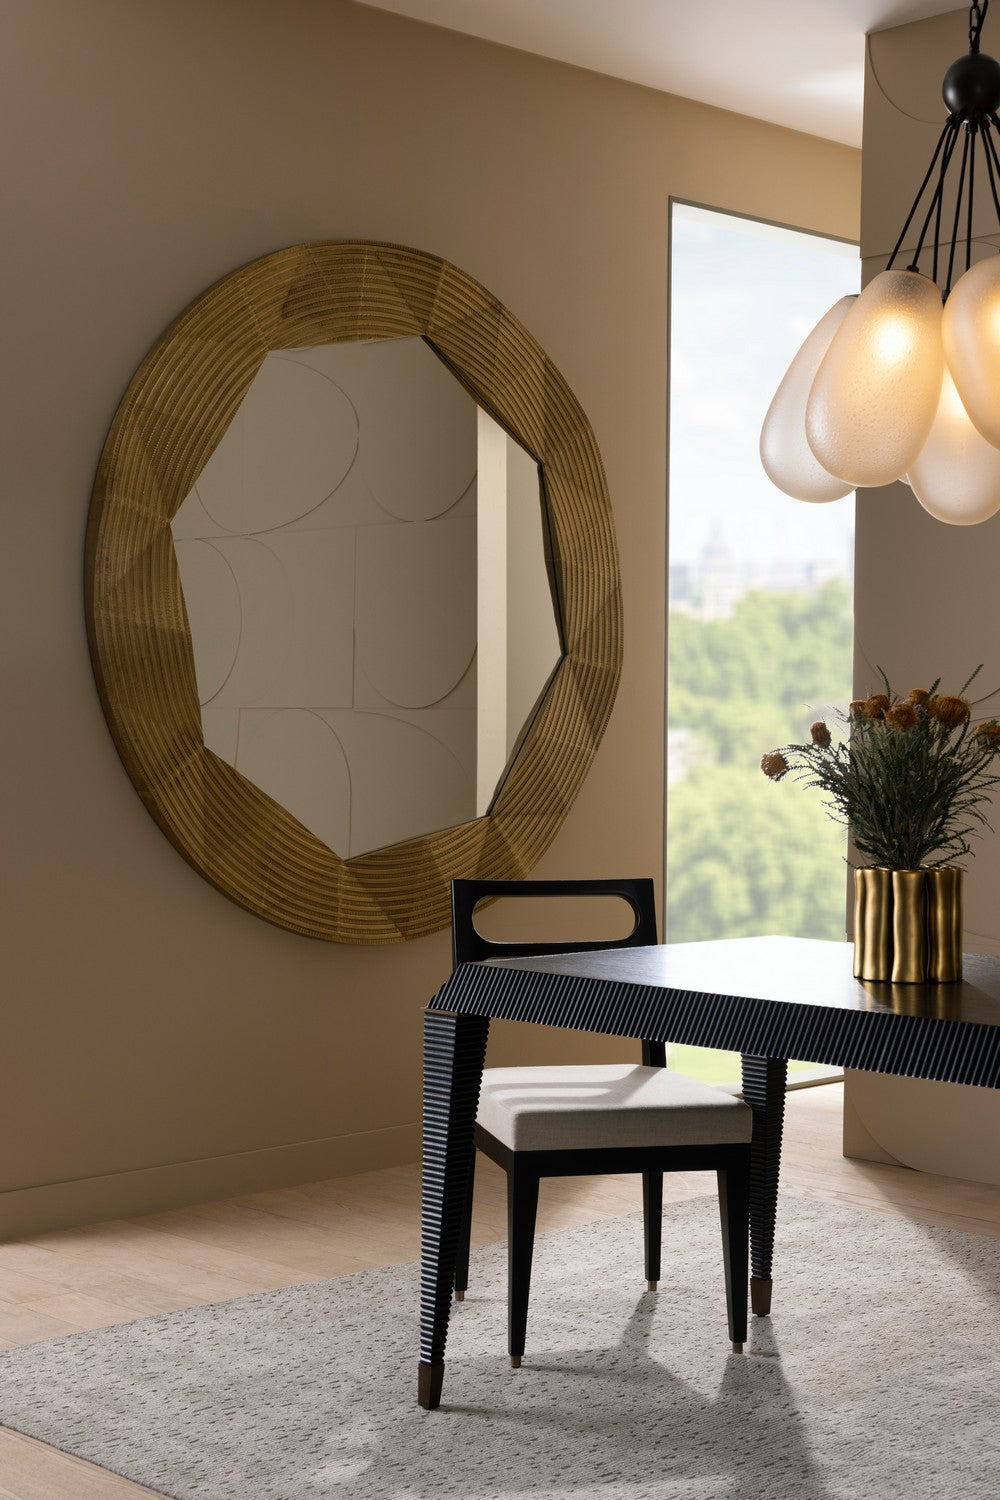 Mirror from the Wilma collection in Antique Brass finish